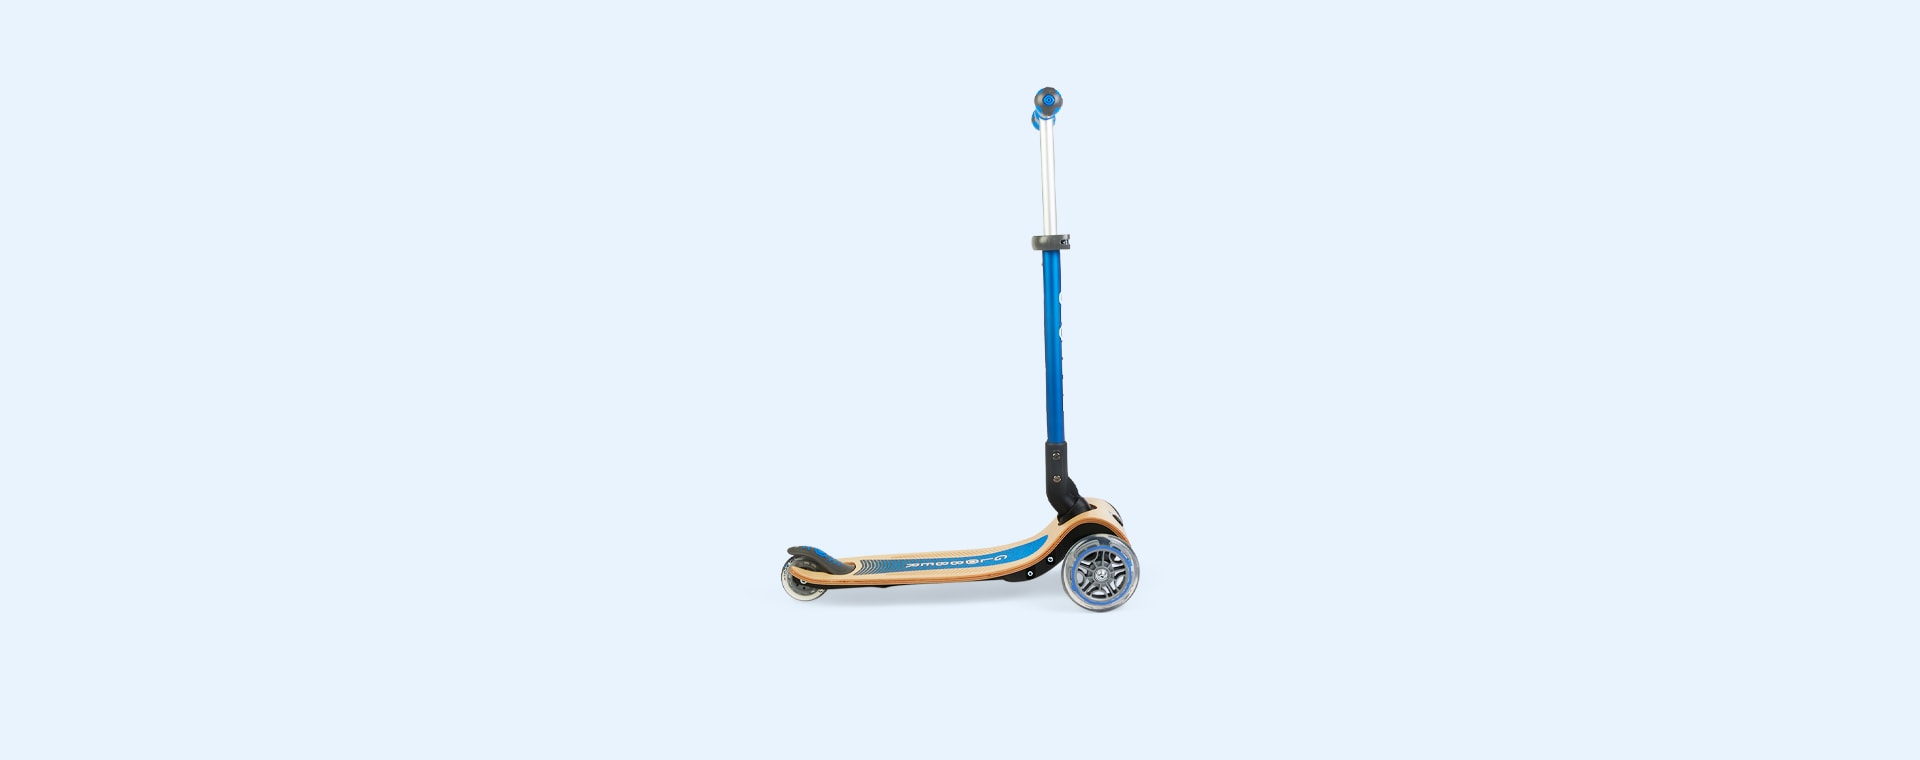 Navy Blue Globber Primo Foldable Wood Scooter